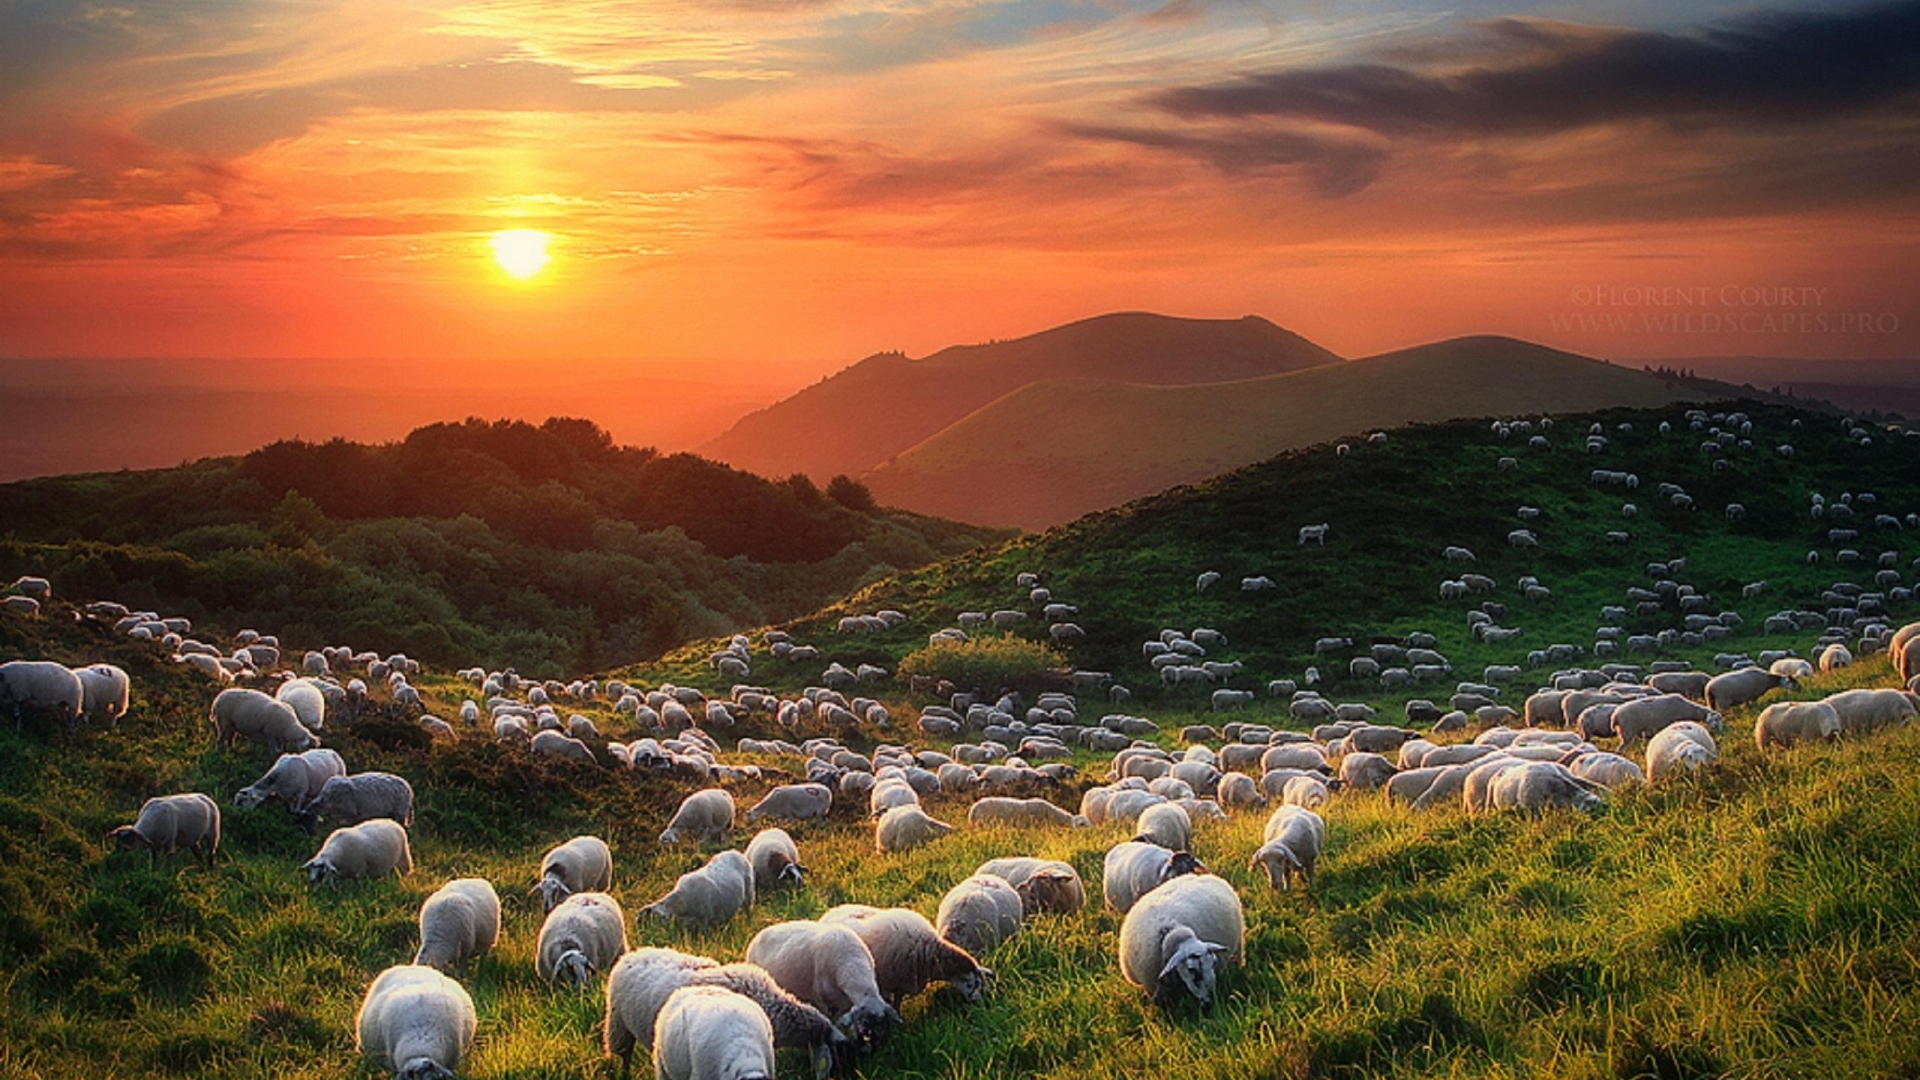 Sheep And Volcanoes Wallpaper In Nature With All